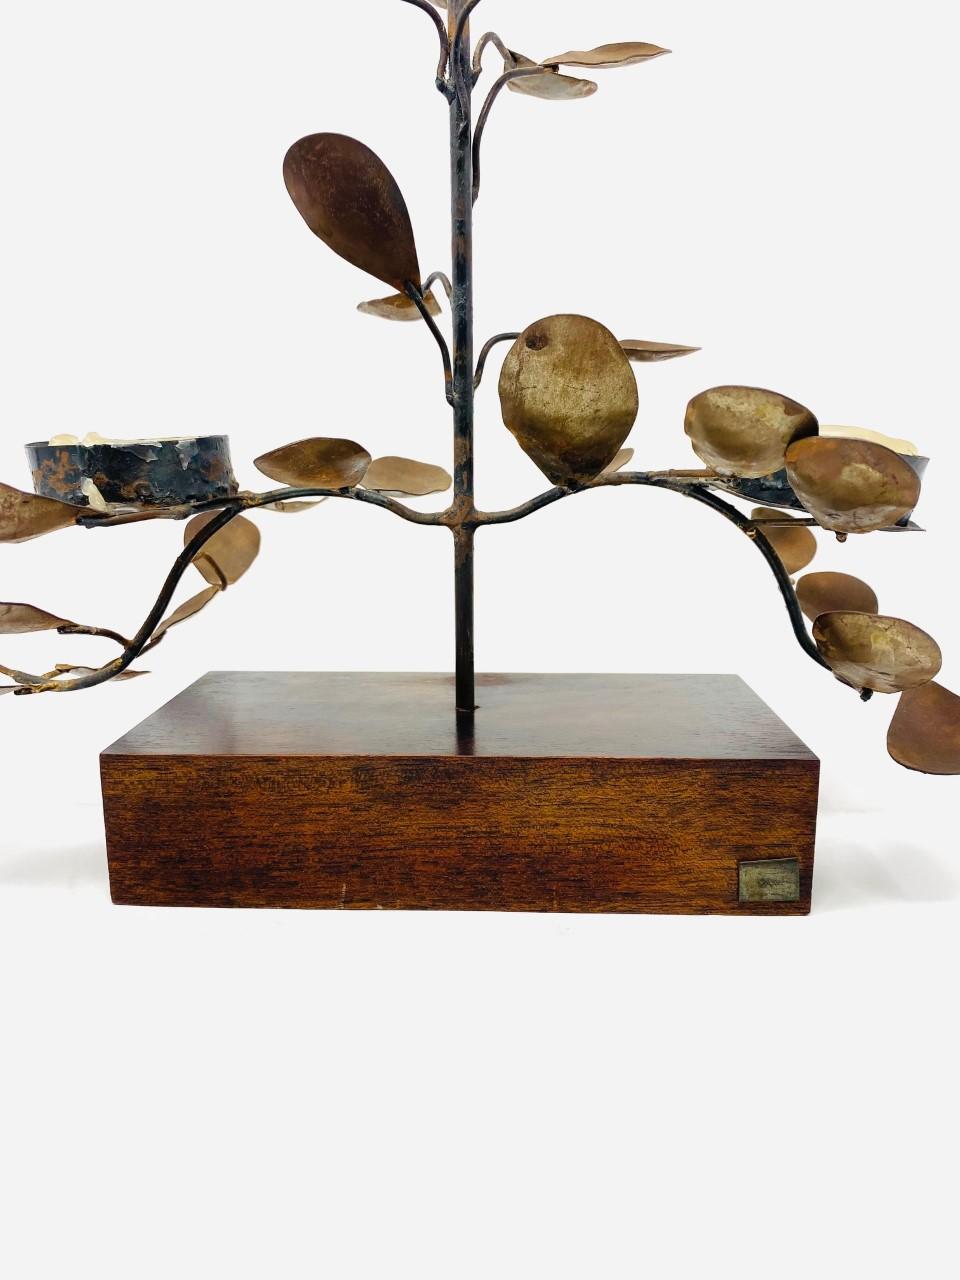 Brutalist Vintage Tree of Life Sculpture by Emaus Talleres Monasticos For Sale